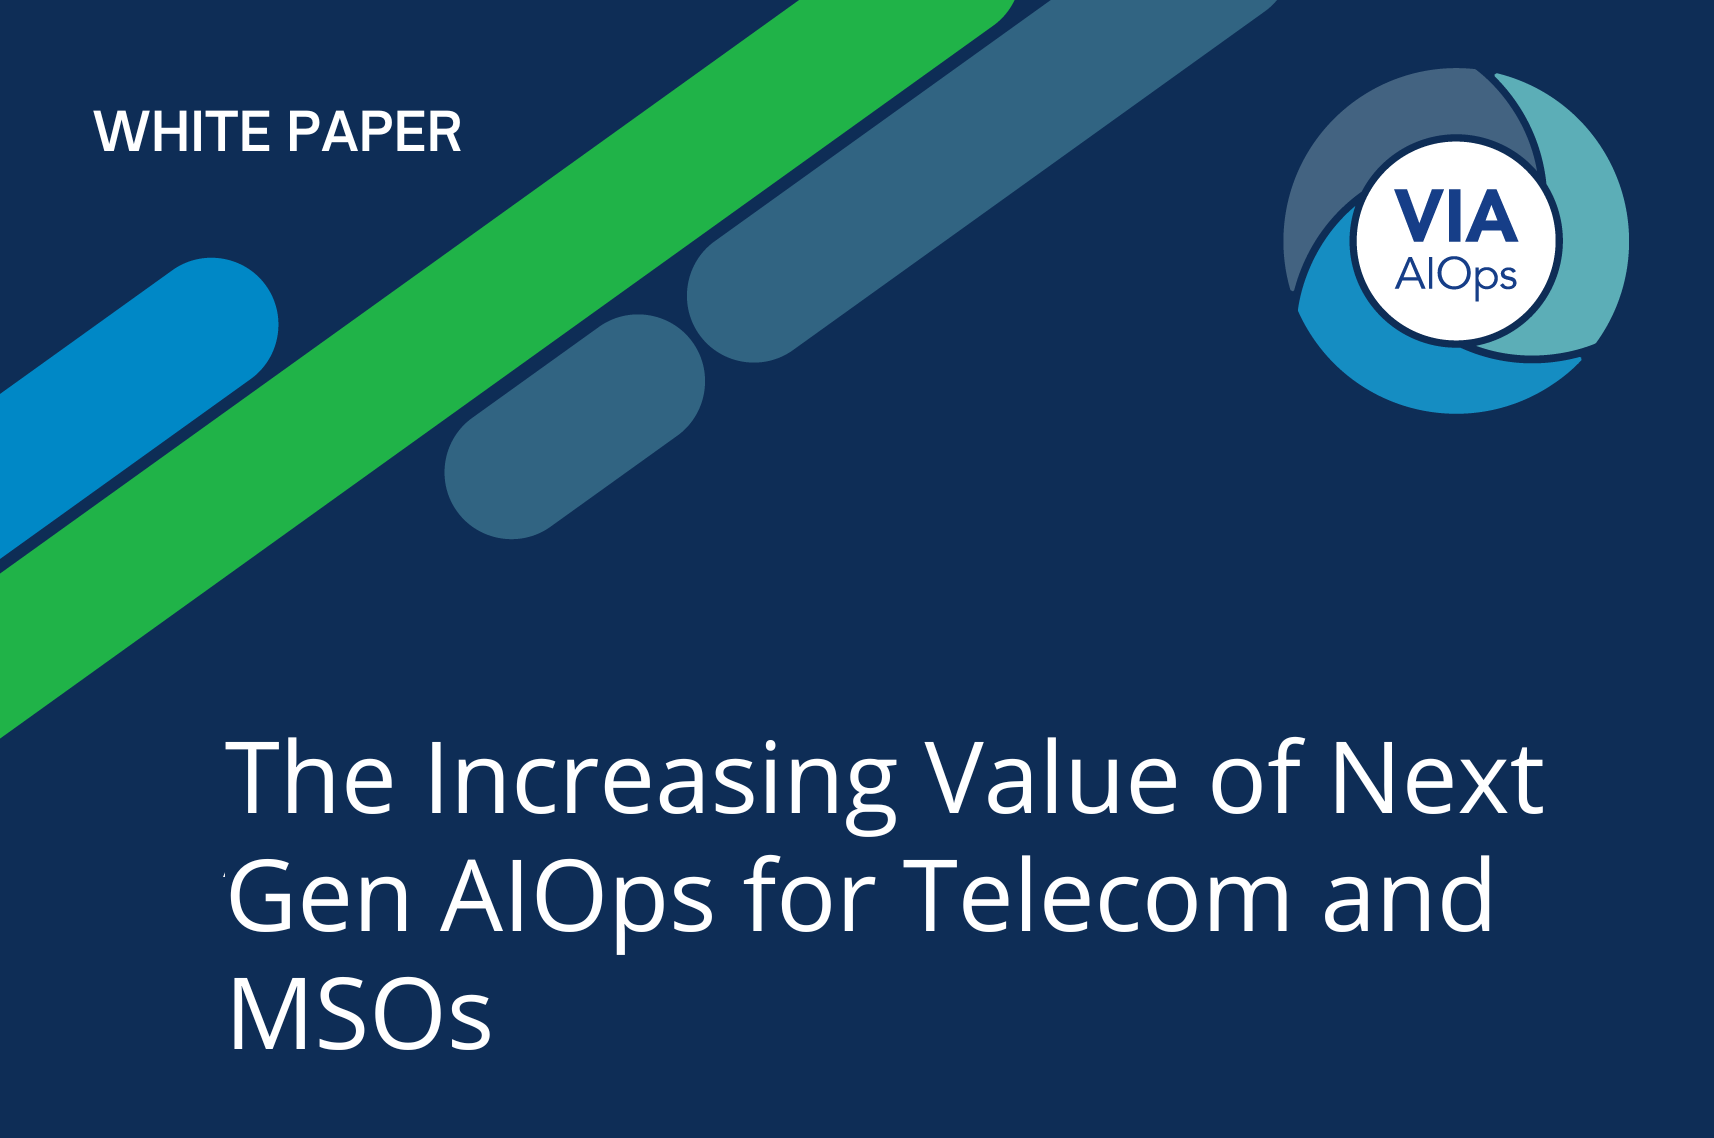 The Increasing Value of Next Gen AIOps for Telecom and MSOs